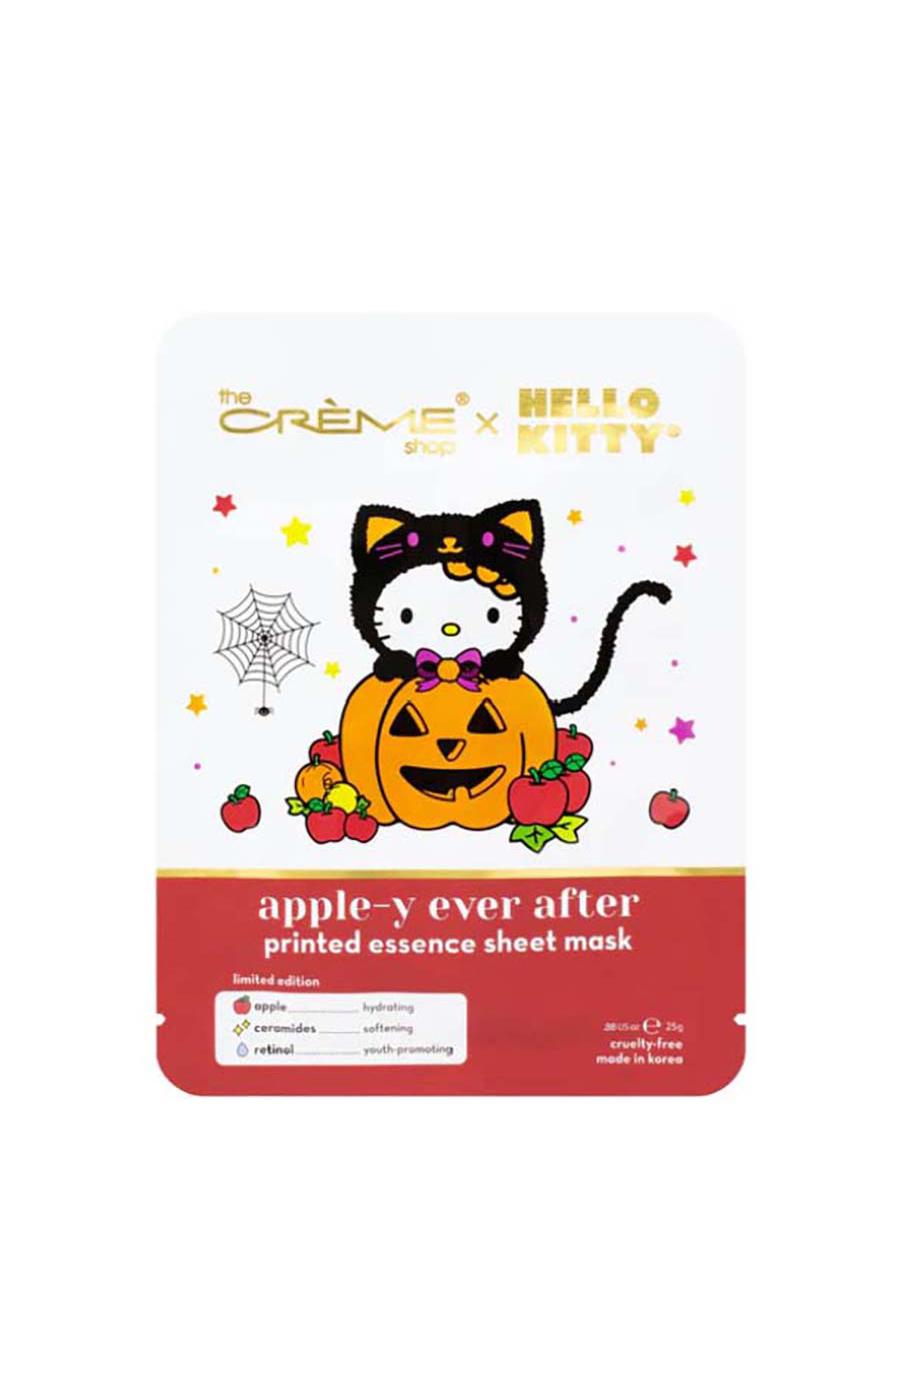 The Crème Shop x Hello Kitty Sheet Masks - Apple-y Ever After; image 1 of 2